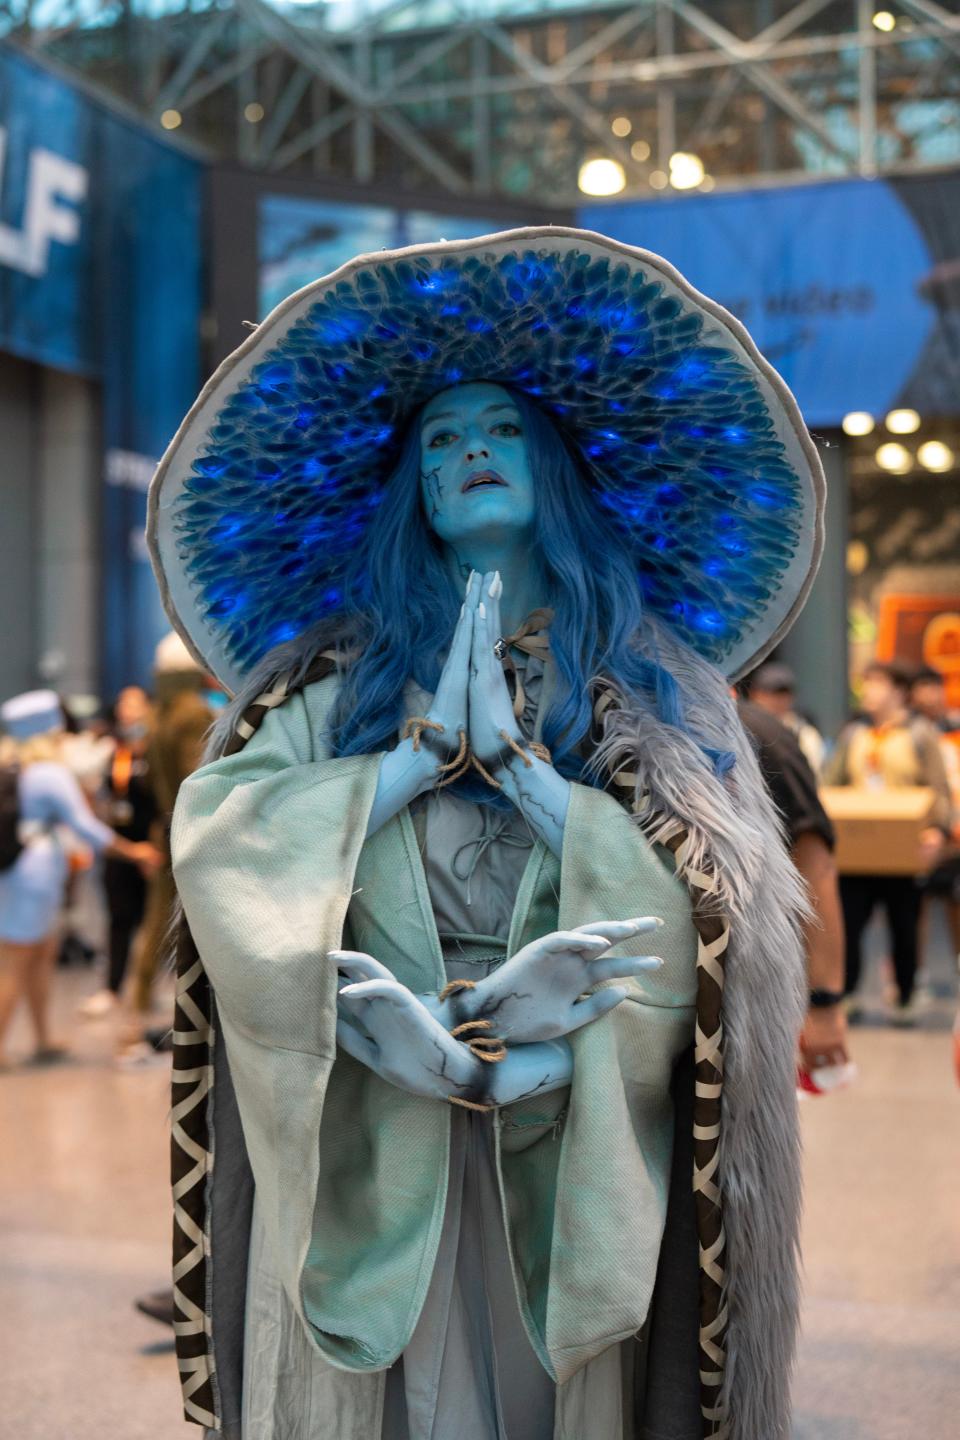 A cosplayer dressed as Ranni the Witch from "Elden Ring" at New York Comic Con.